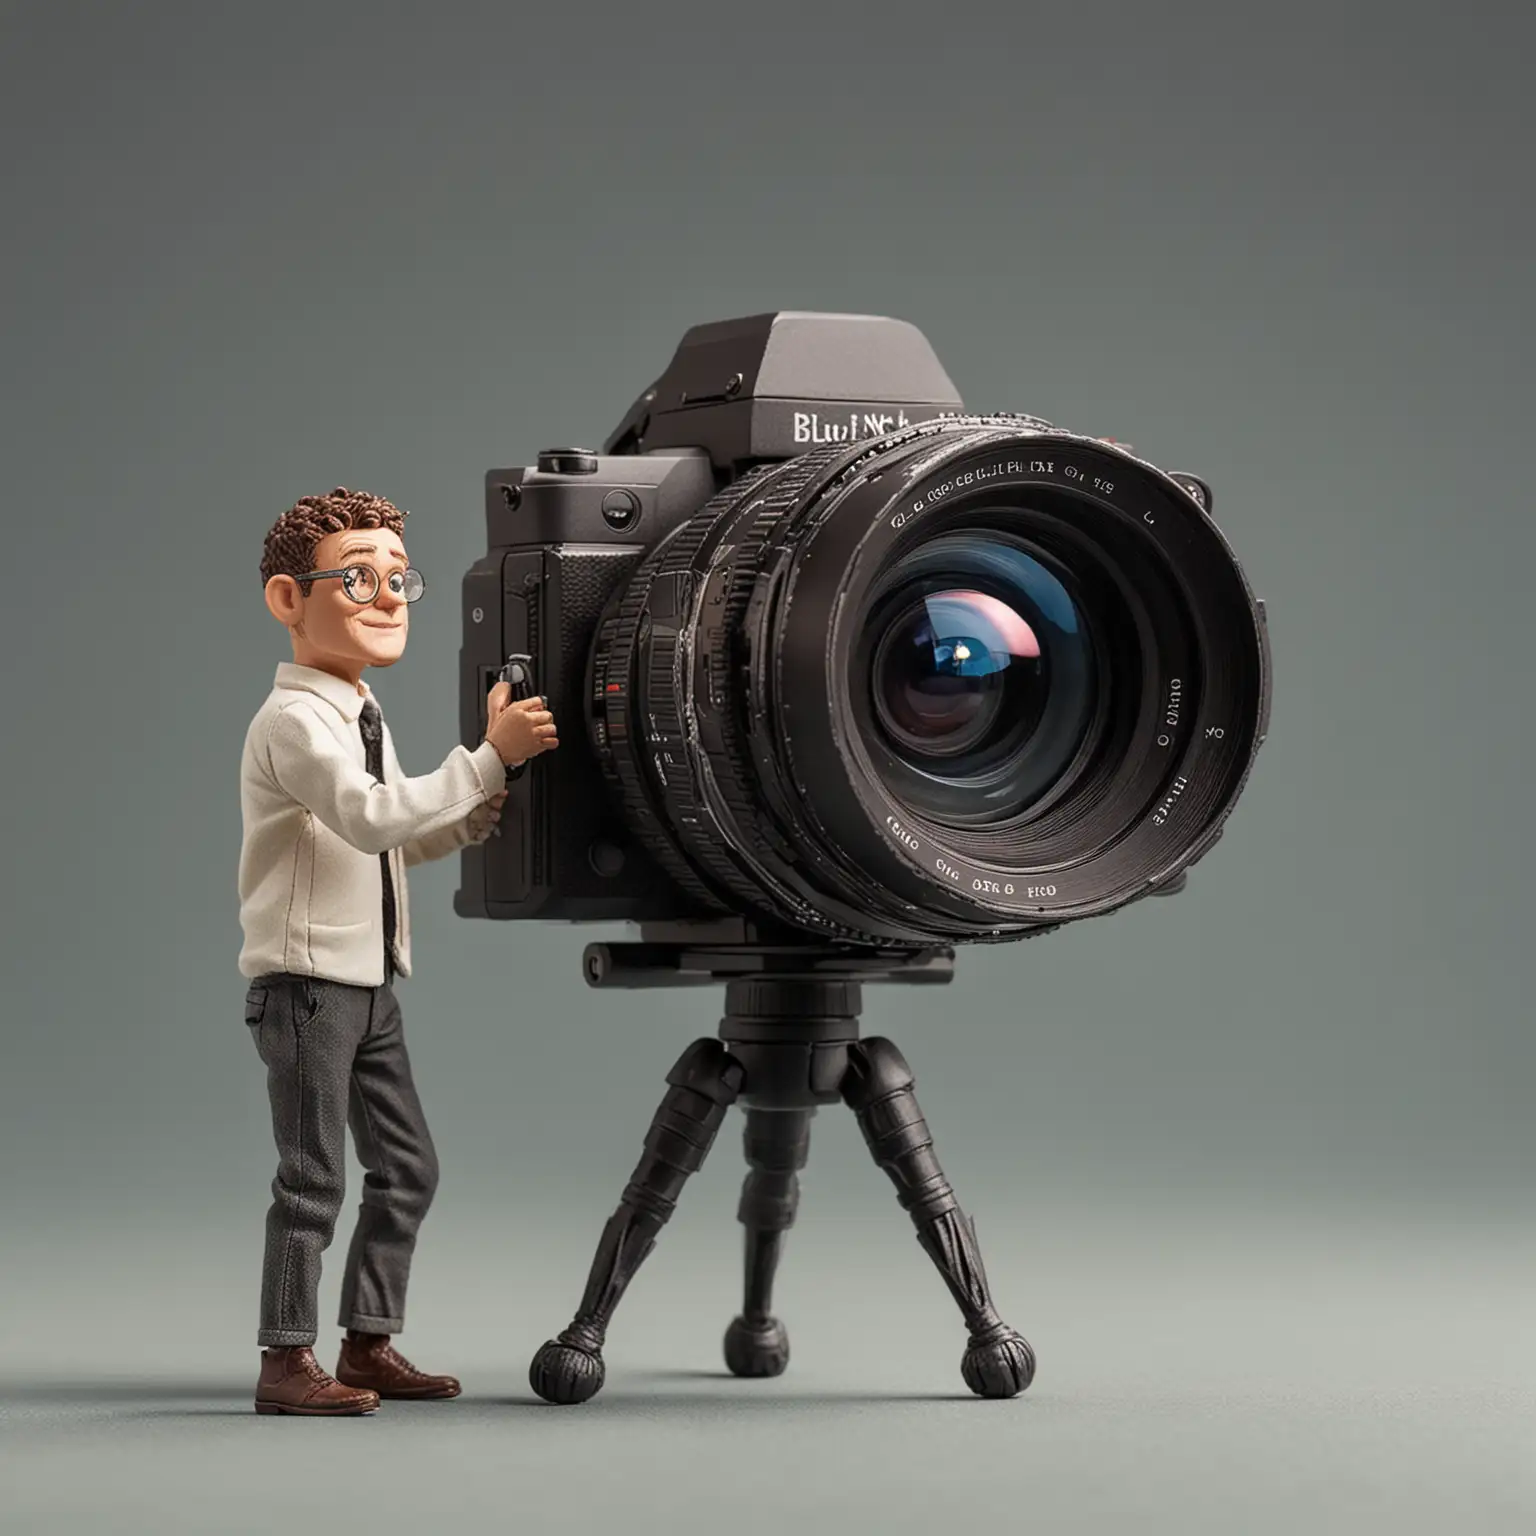 Tiny Man Capturing Epic Moments with Gigantic Camera